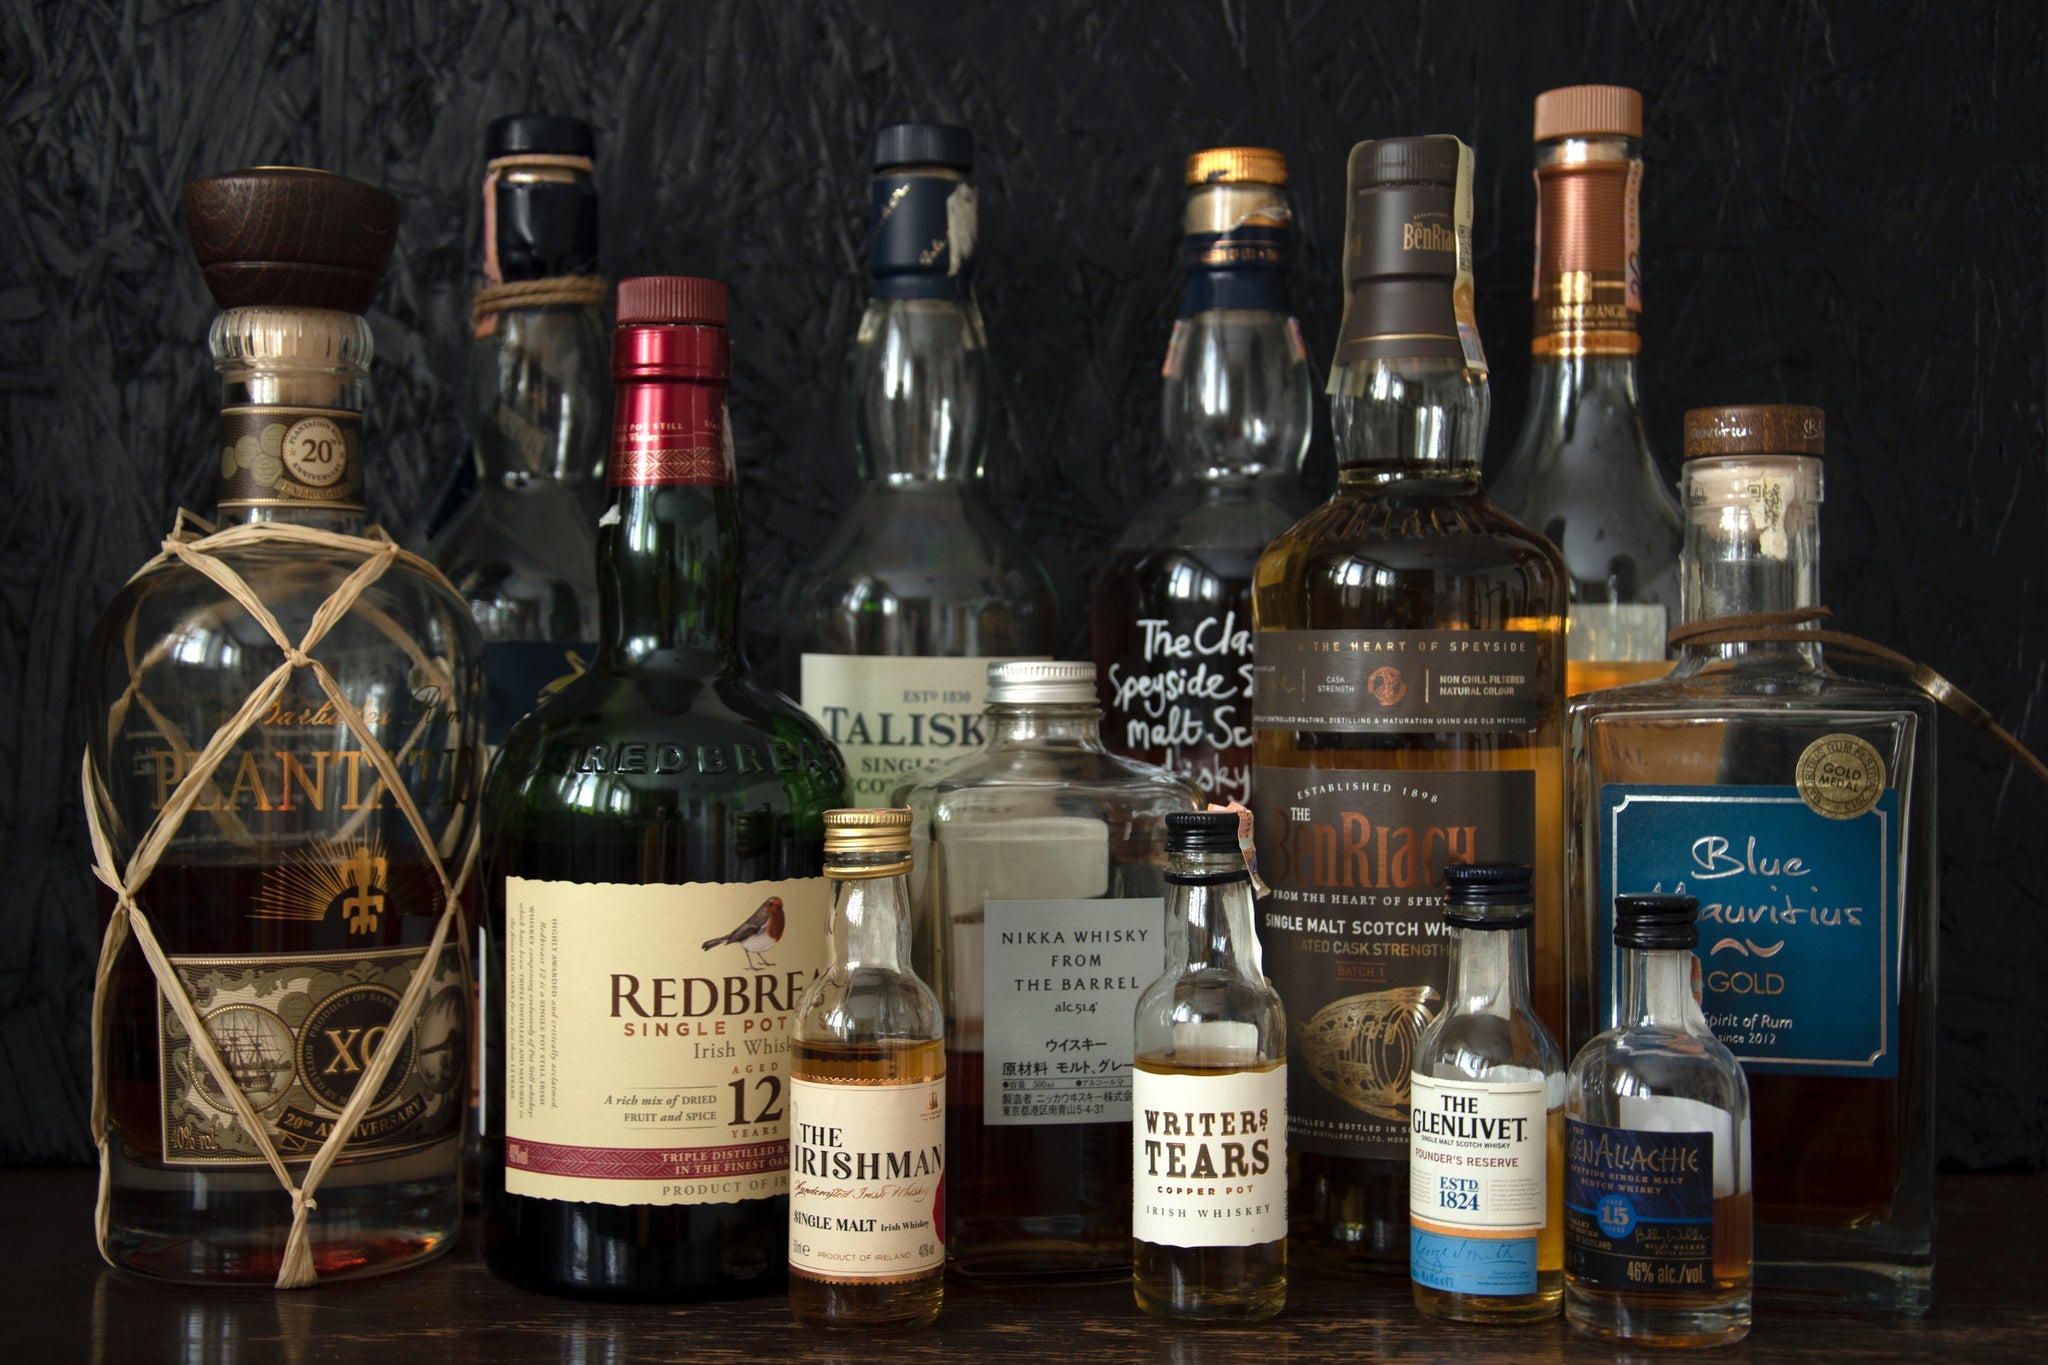 How to Choose a Good Bottle of Whiskey?